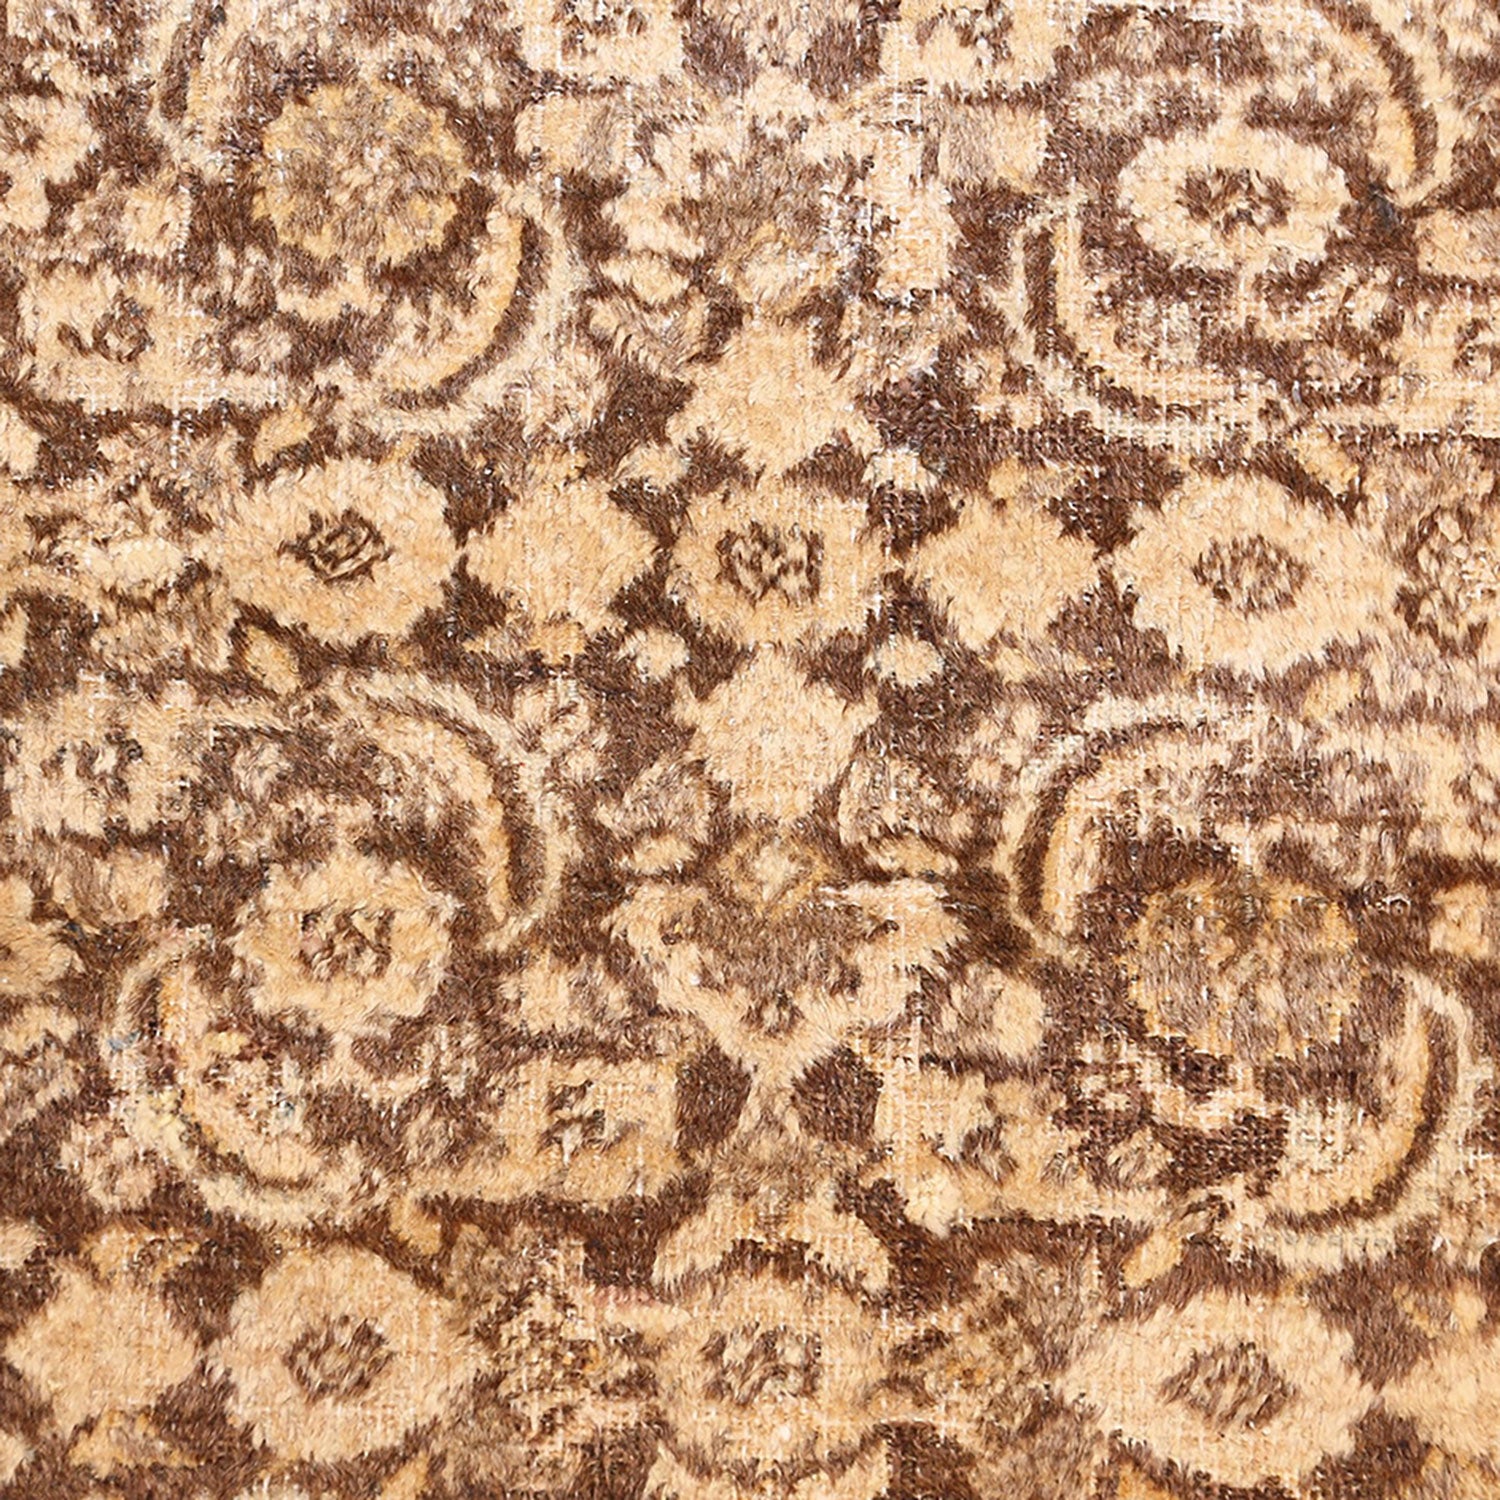 Close-up of a well-used, intricate patterned carpet in warm tones.